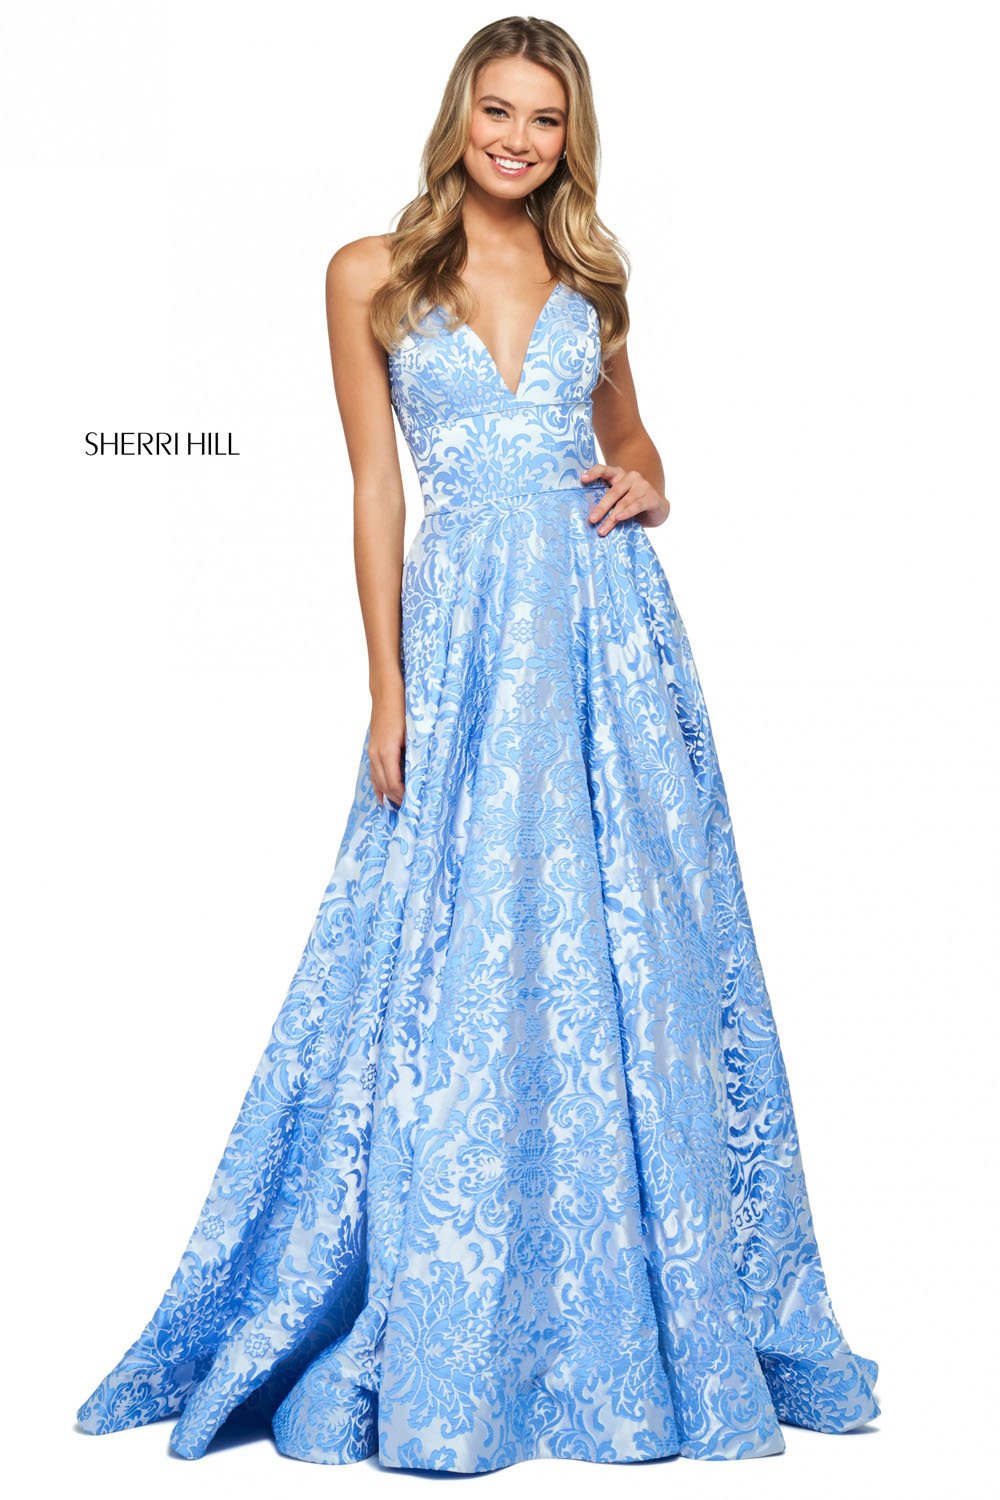 Sherri Hill 53881 dress images in these colors: Coral, Yellow, Blue.